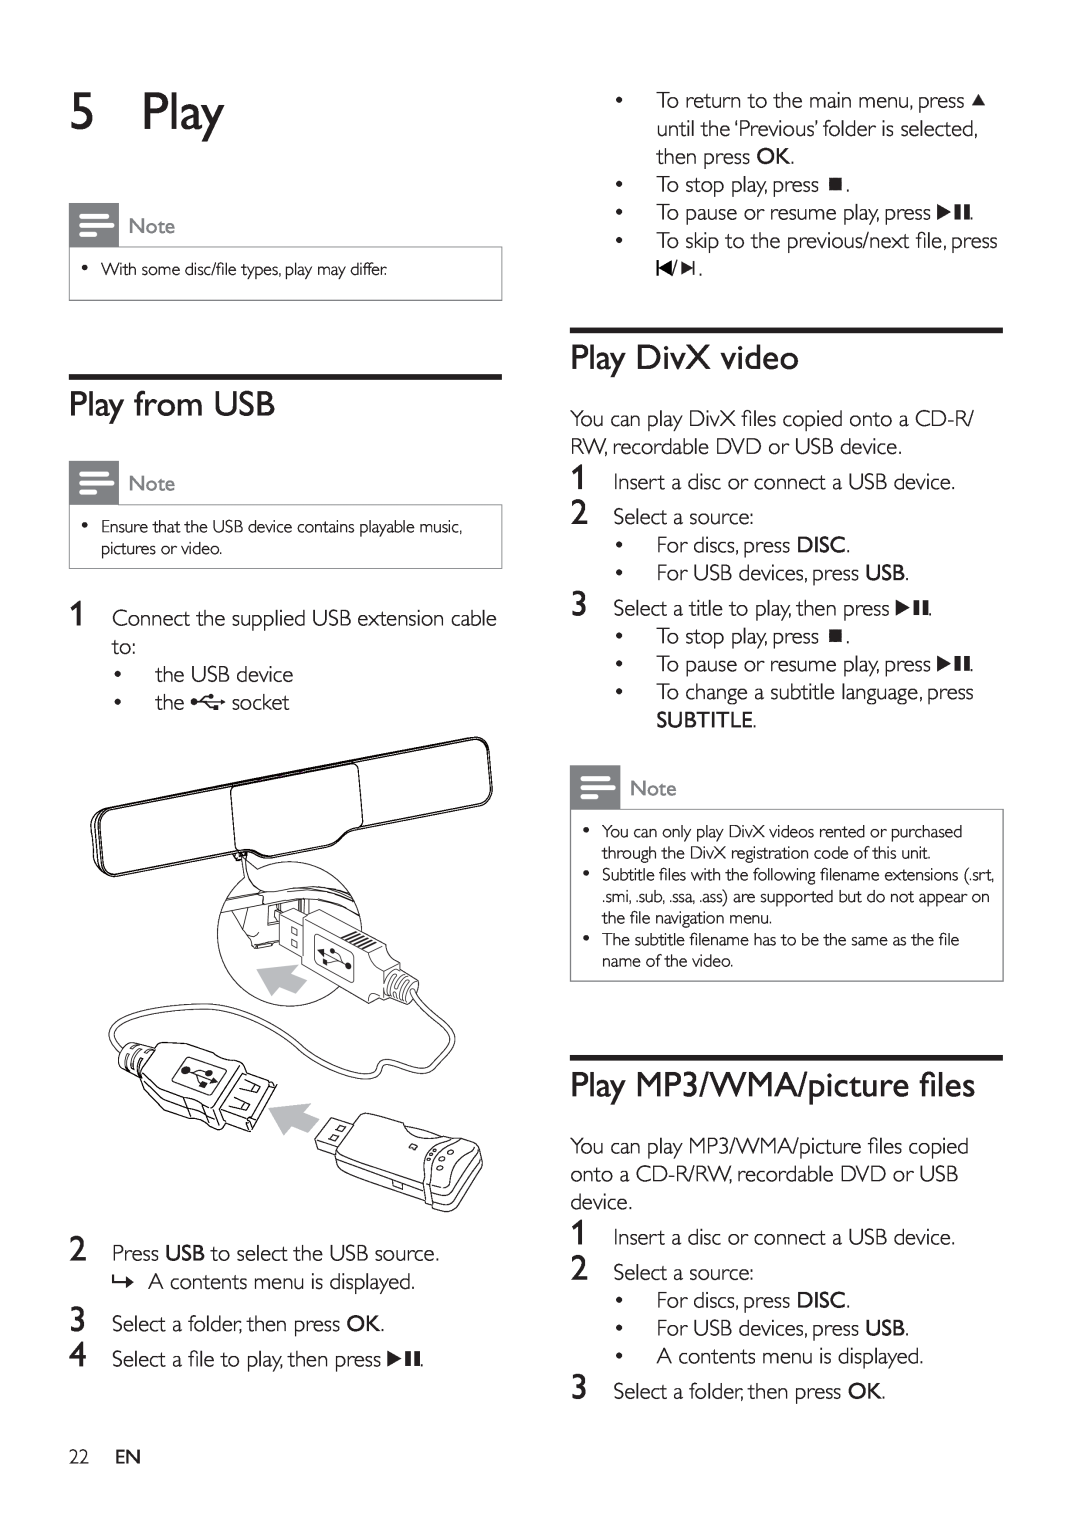 Philips HSB2351/55 user manual Play from USB, Play DivX video, Play MP3/WMA/picture ﬁ les 